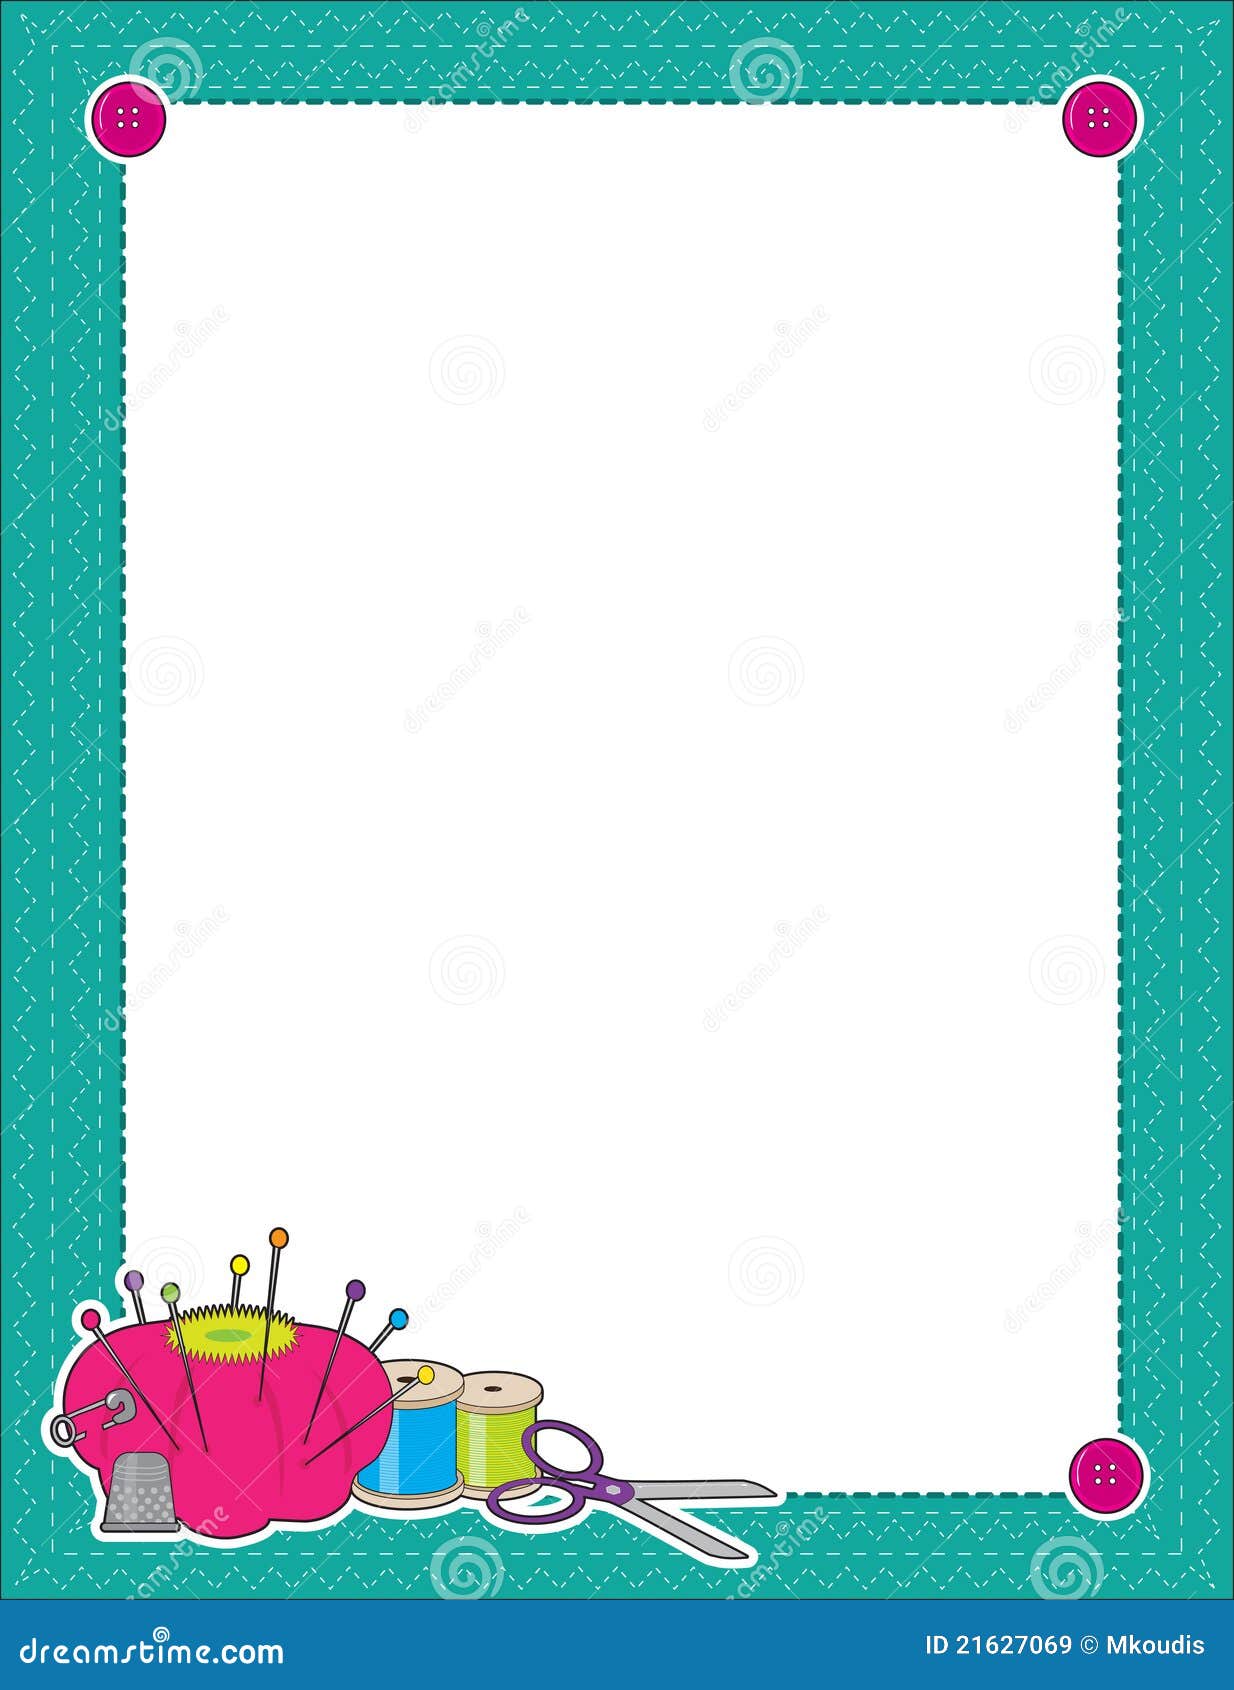 free clip art borders sewing - photo #15